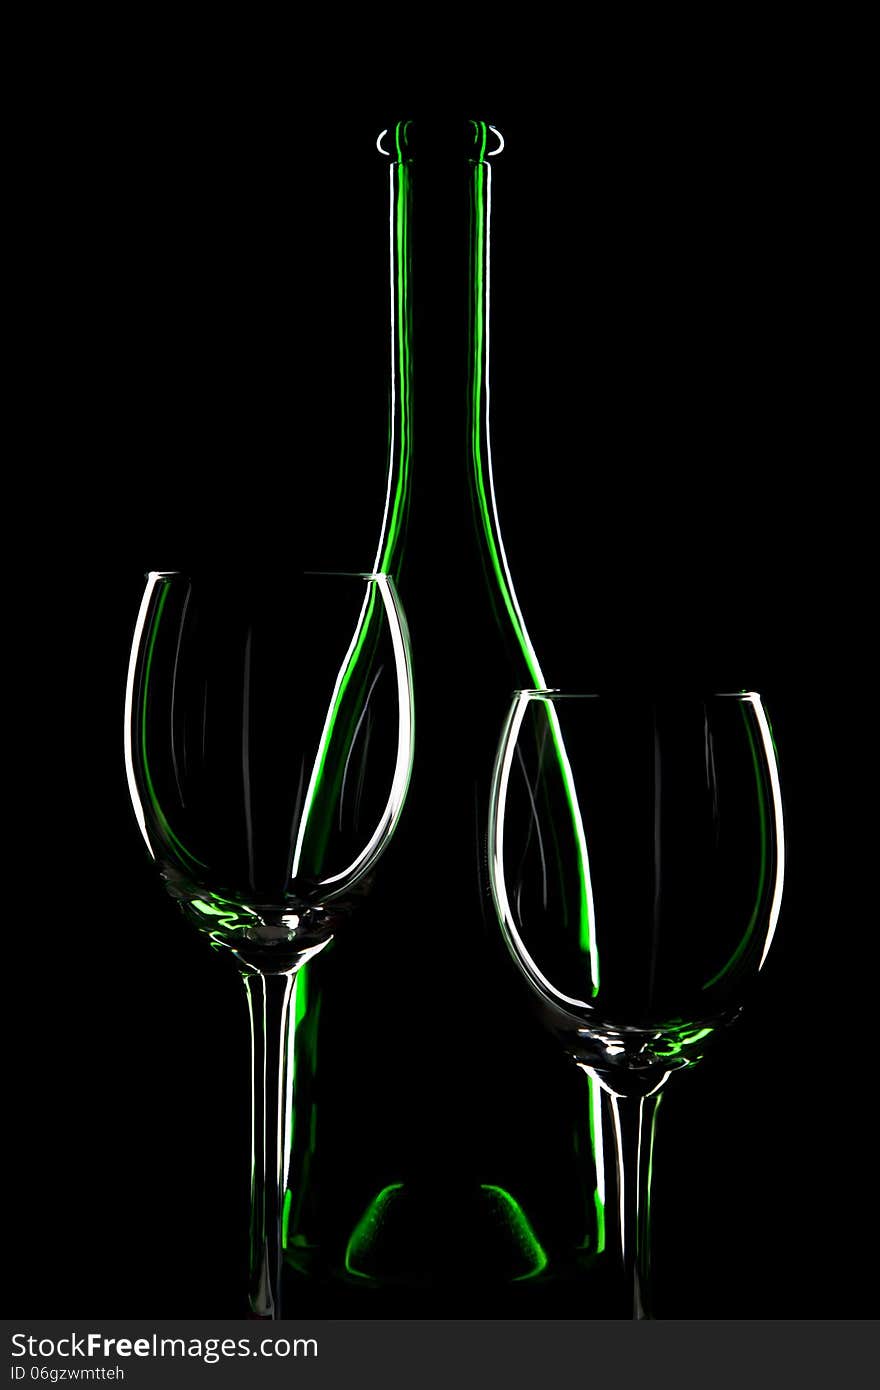 Two empty wine glass and a bottle